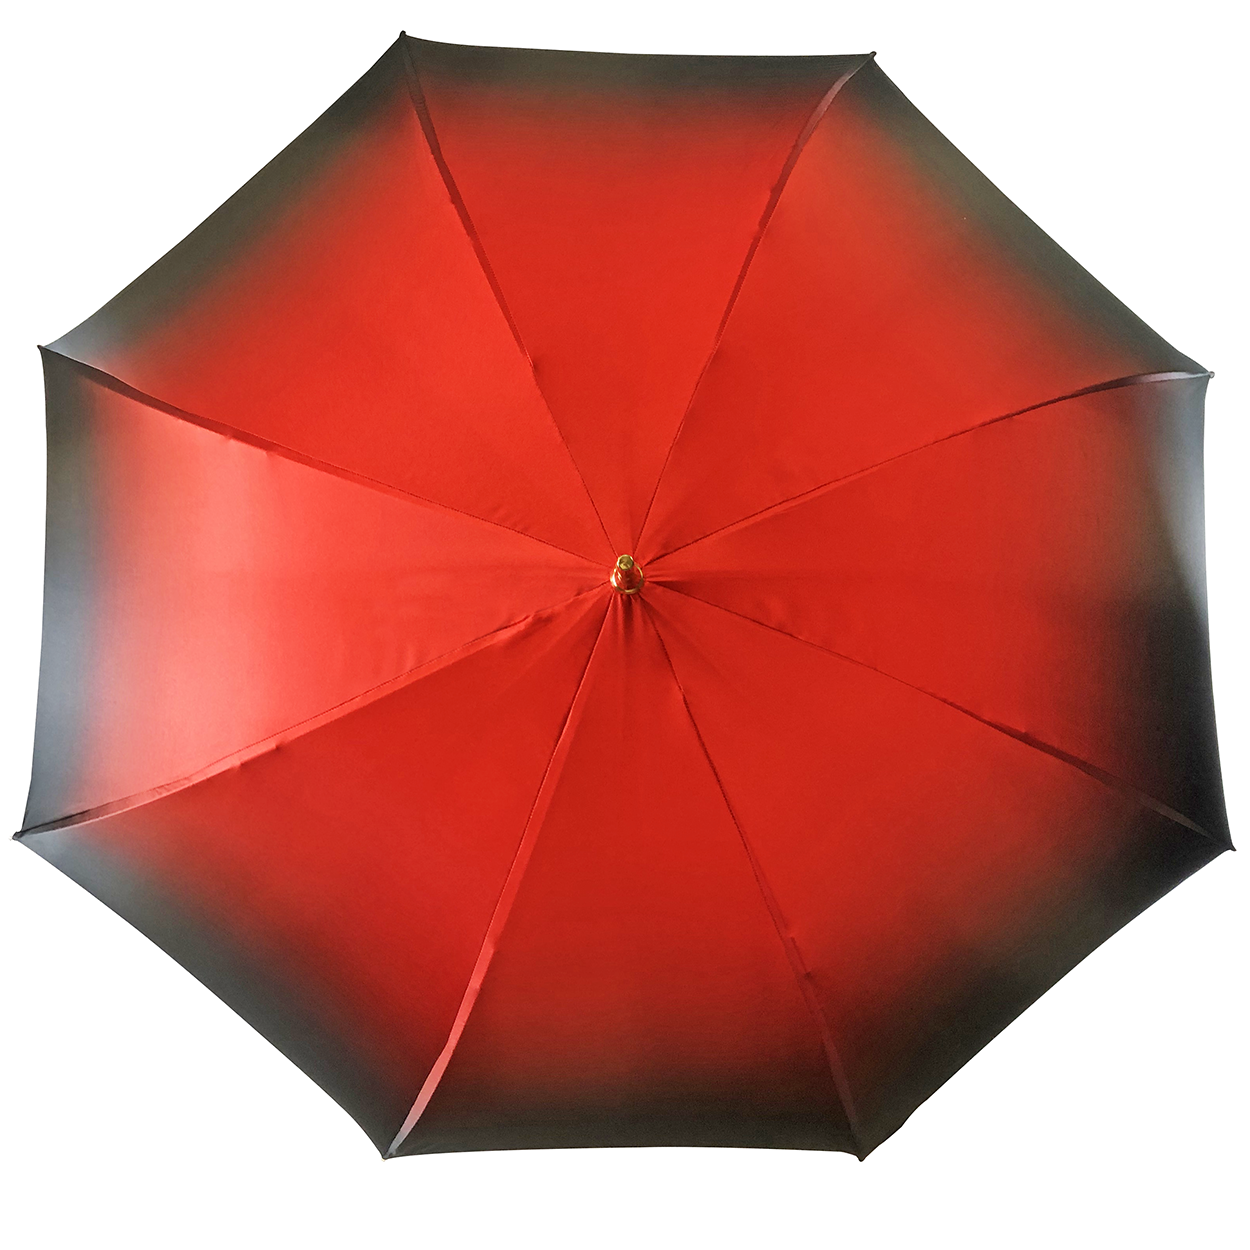 Marvelous Green and Red Umbrella with Goldplated flower